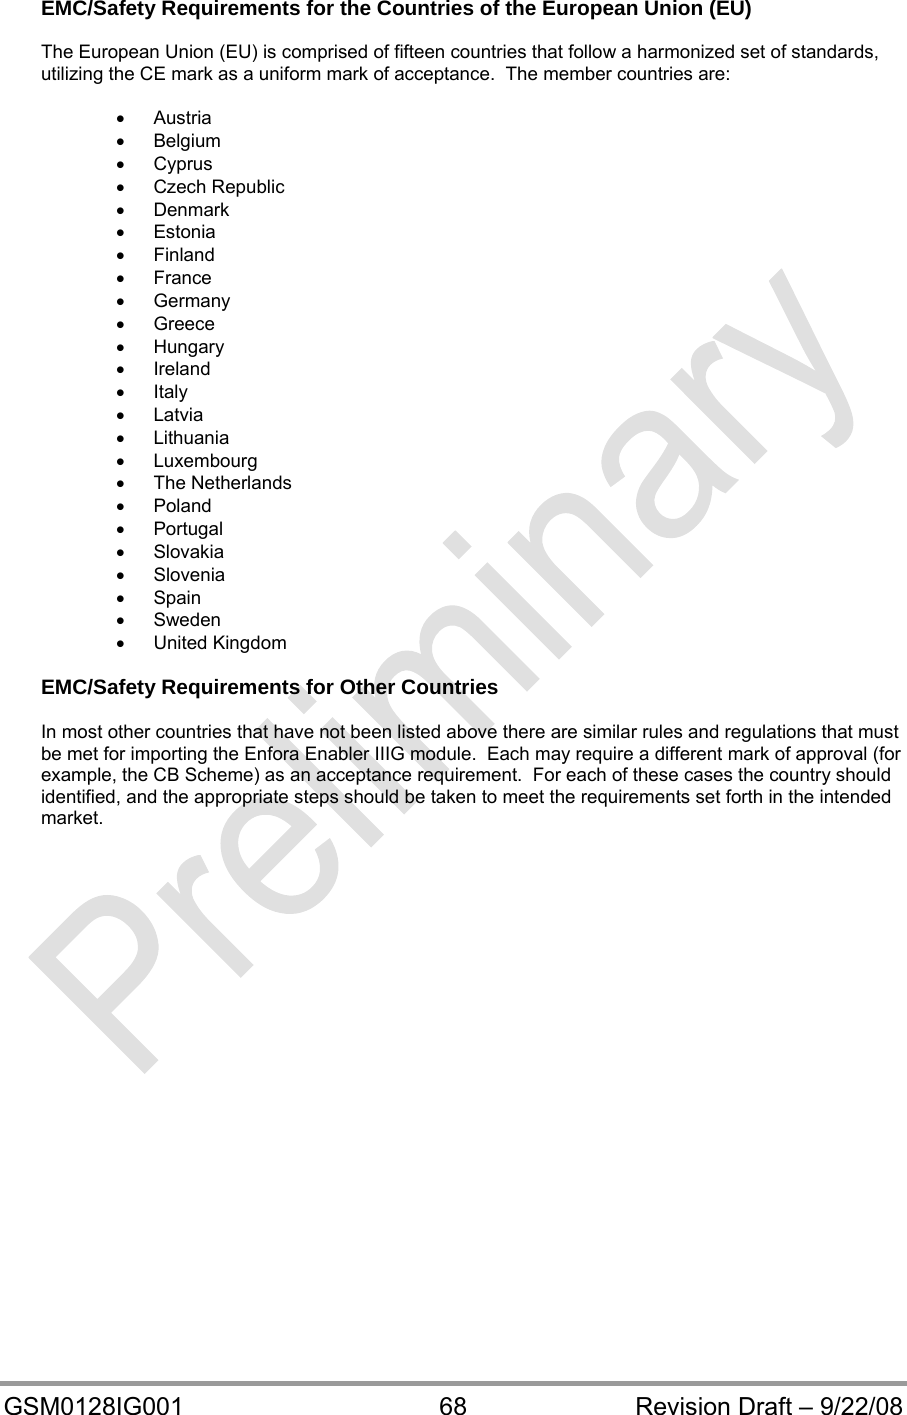  GSM0128IG001  68  Revision Draft – 9/22/08 EMC/Safety Requirements for the Countries of the European Union (EU)  The European Union (EU) is comprised of fifteen countries that follow a harmonized set of standards, utilizing the CE mark as a uniform mark of acceptance.  The member countries are:   Austria  Belgium  Cyprus  Czech Republic  Denmark  Estonia  Finland  France  Germany  Greece  Hungary  Ireland  Italy  Latvia  Lithuania  Luxembourg  The Netherlands  Poland  Portugal  Slovakia  Slovenia  Spain  Sweden  United Kingdom  EMC/Safety Requirements for Other Countries  In most other countries that have not been listed above there are similar rules and regulations that must be met for importing the Enfora Enabler IIIG module.  Each may require a different mark of approval (for example, the CB Scheme) as an acceptance requirement.  For each of these cases the country should identified, and the appropriate steps should be taken to meet the requirements set forth in the intended market.    